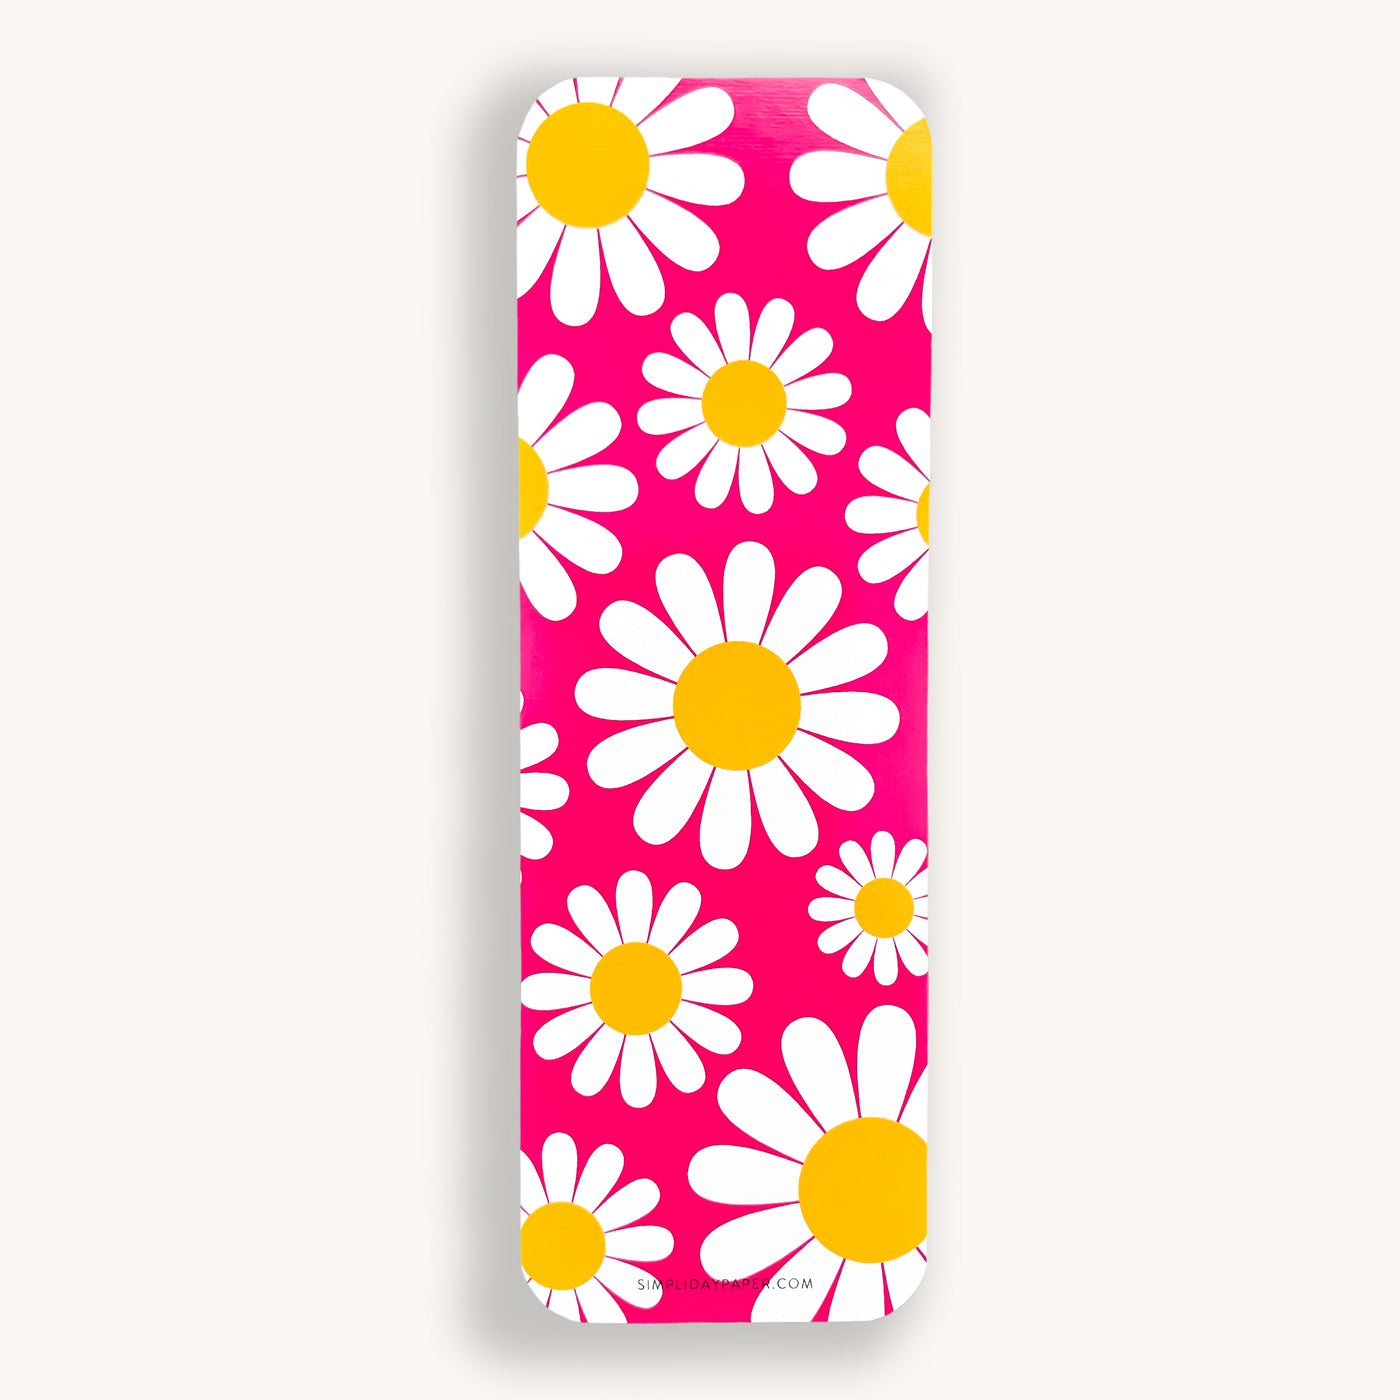 Daisies on a fuchsia background bookmark with rounded corners by Simpliday Paper, Olga Nagorna.